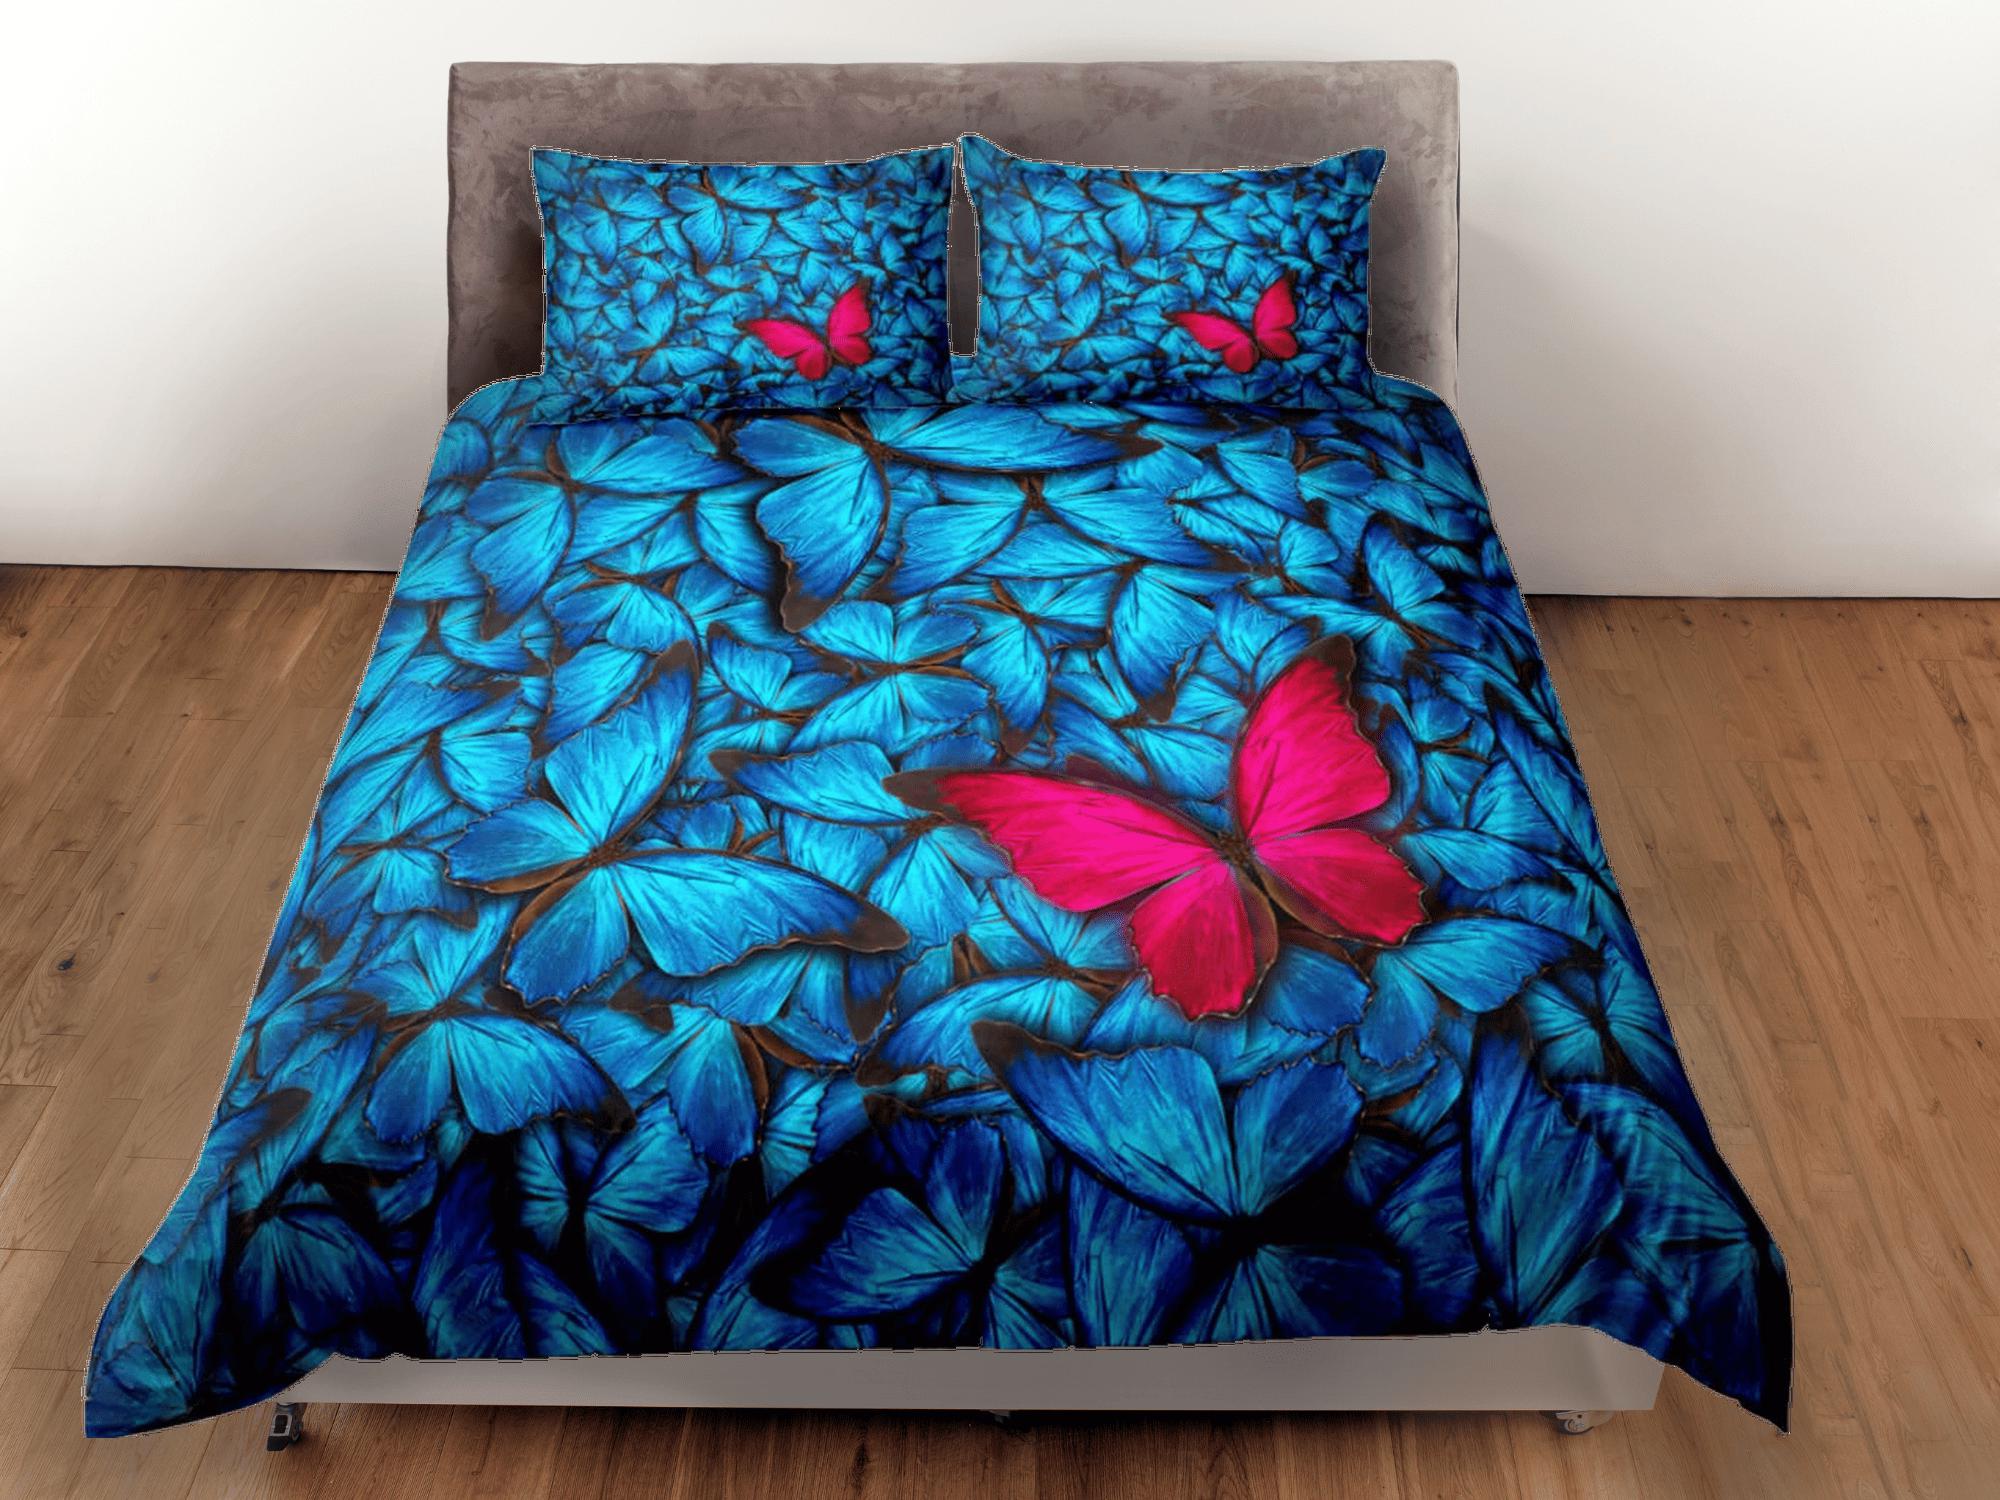 daintyduvet Stand out butterfly bedding blue duvet cover colorful dorm bedding full size adult duvet king queen twin, butterfly nursery toddler bedding